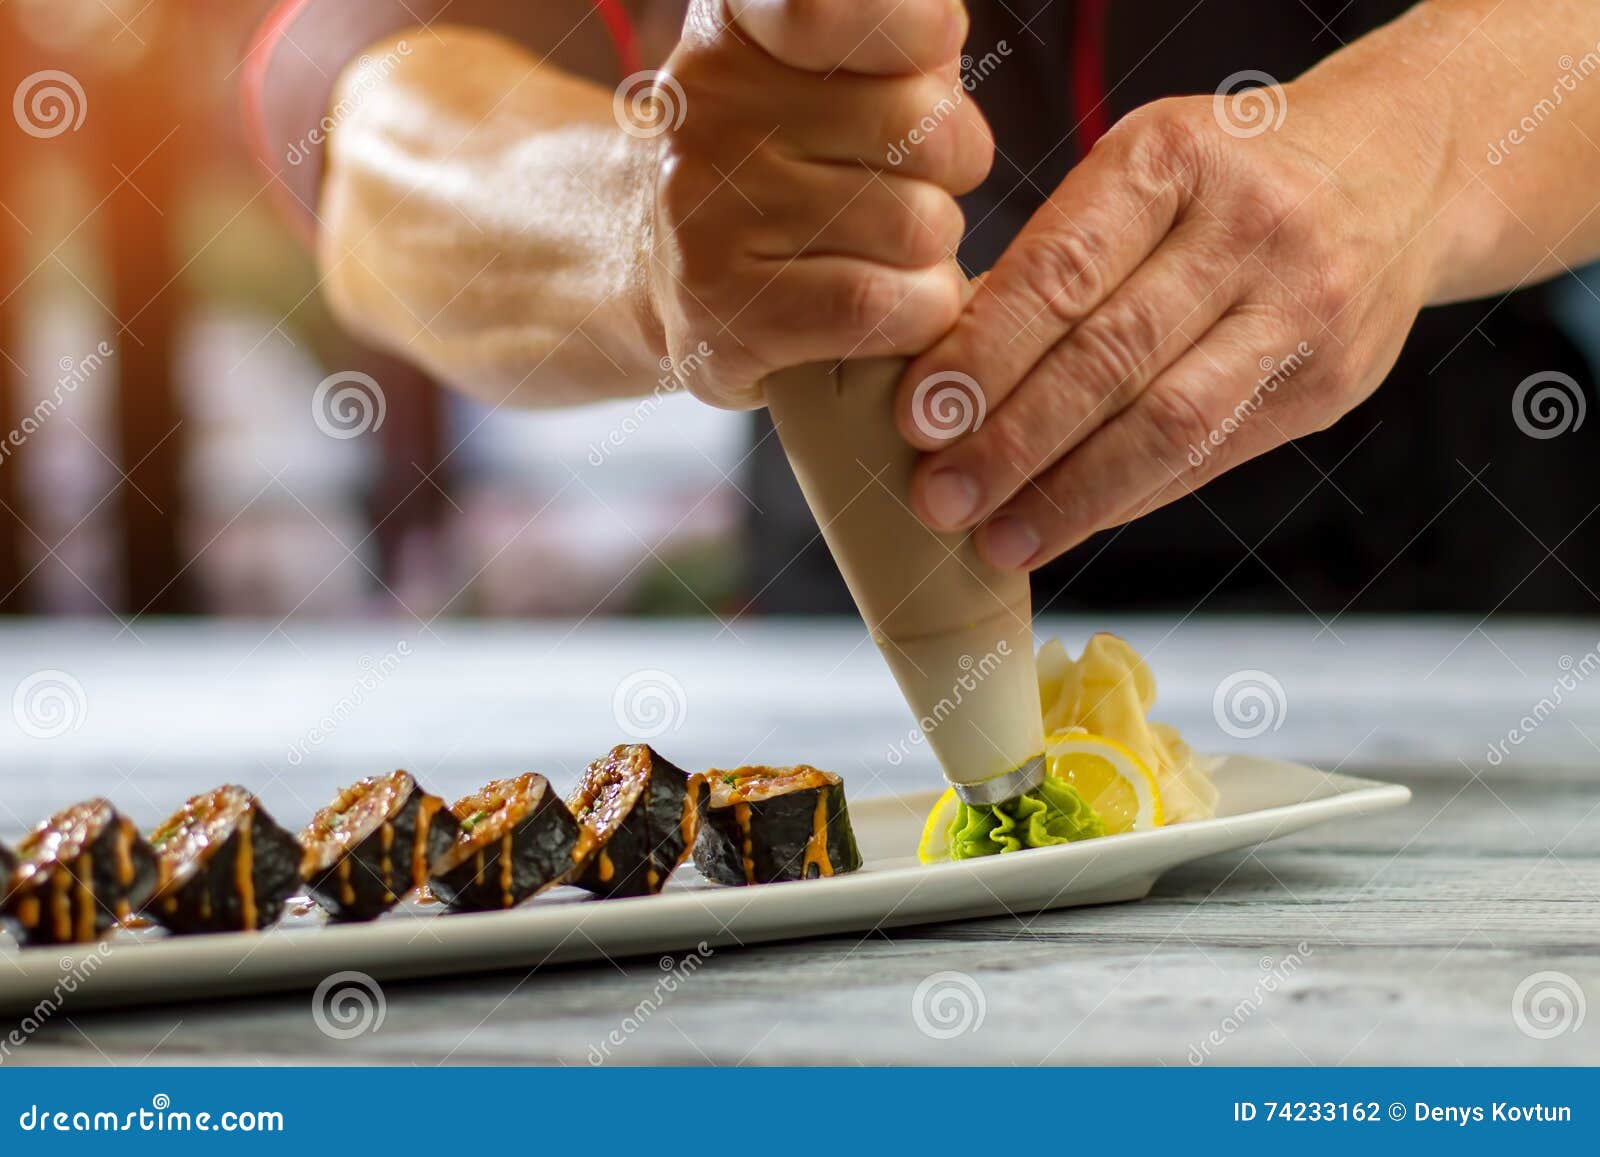 Pastry Tool Near Sushi Rolls. Stock Photo - Image of natural, restaurant: 74233162